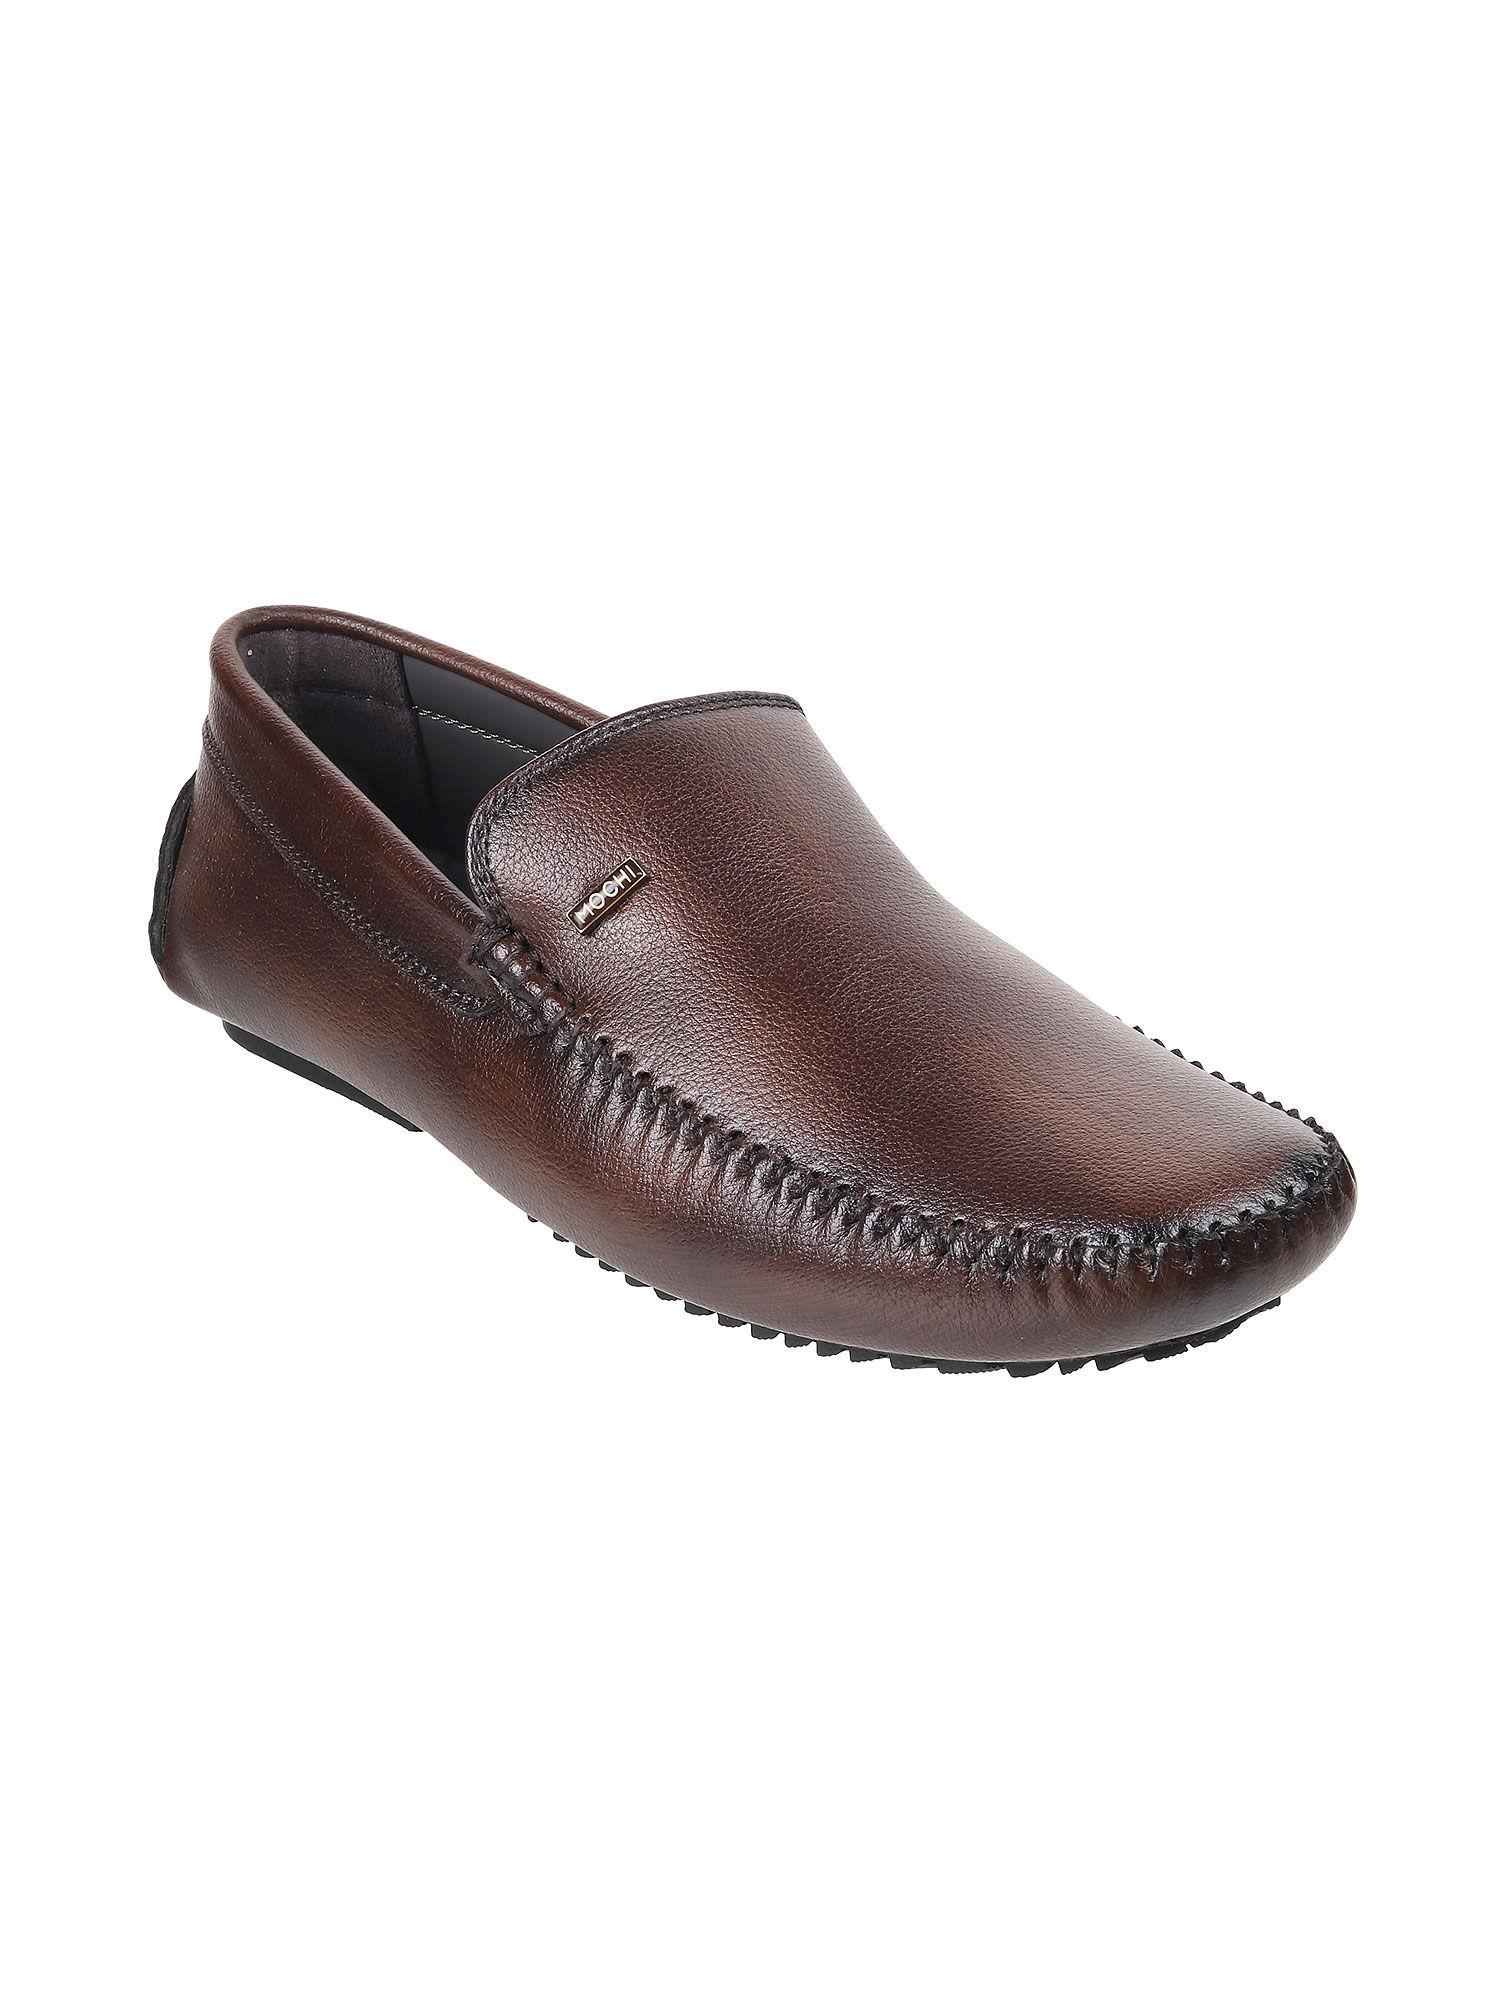 mens brown driving shoes mochi brown solid slip-on